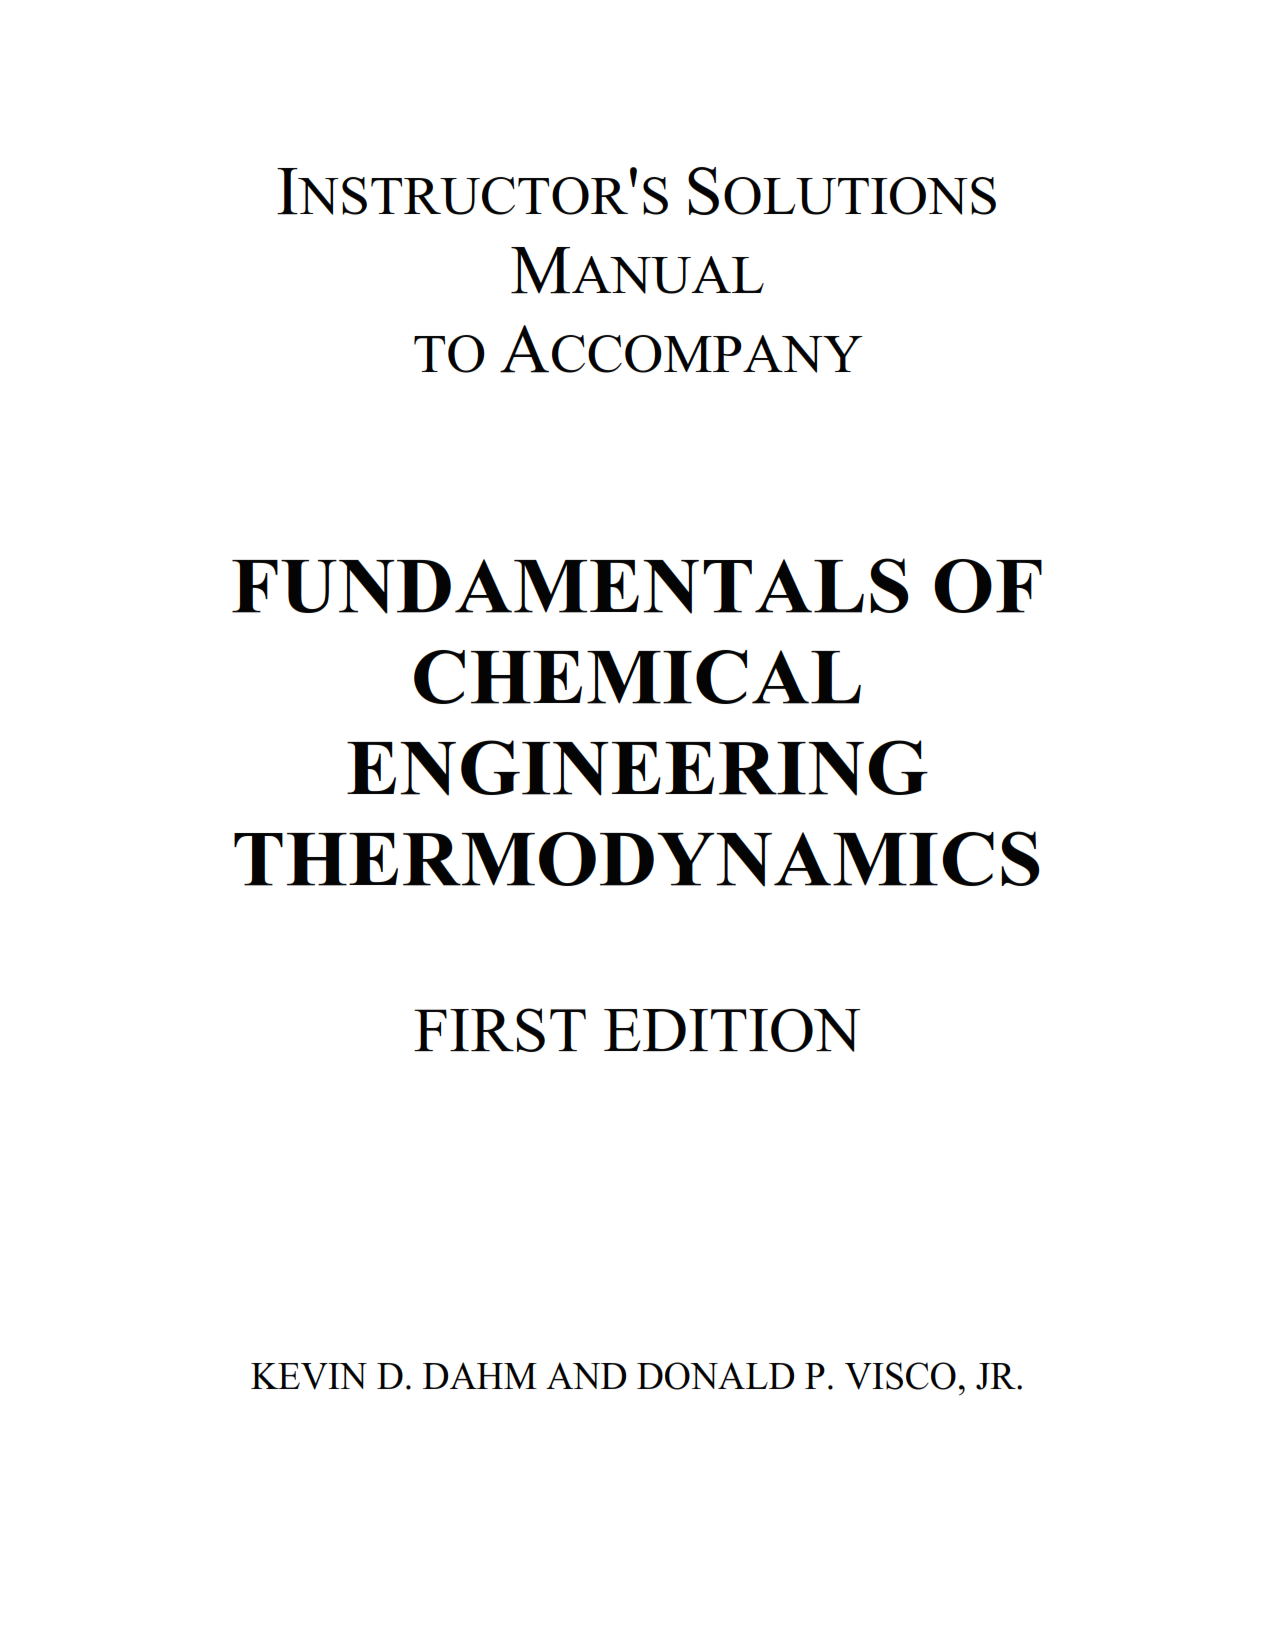 download free Fundamentals of Chemical Engineering Thermodynamics solution manual written by Kevin D. Dahm eBook pdf